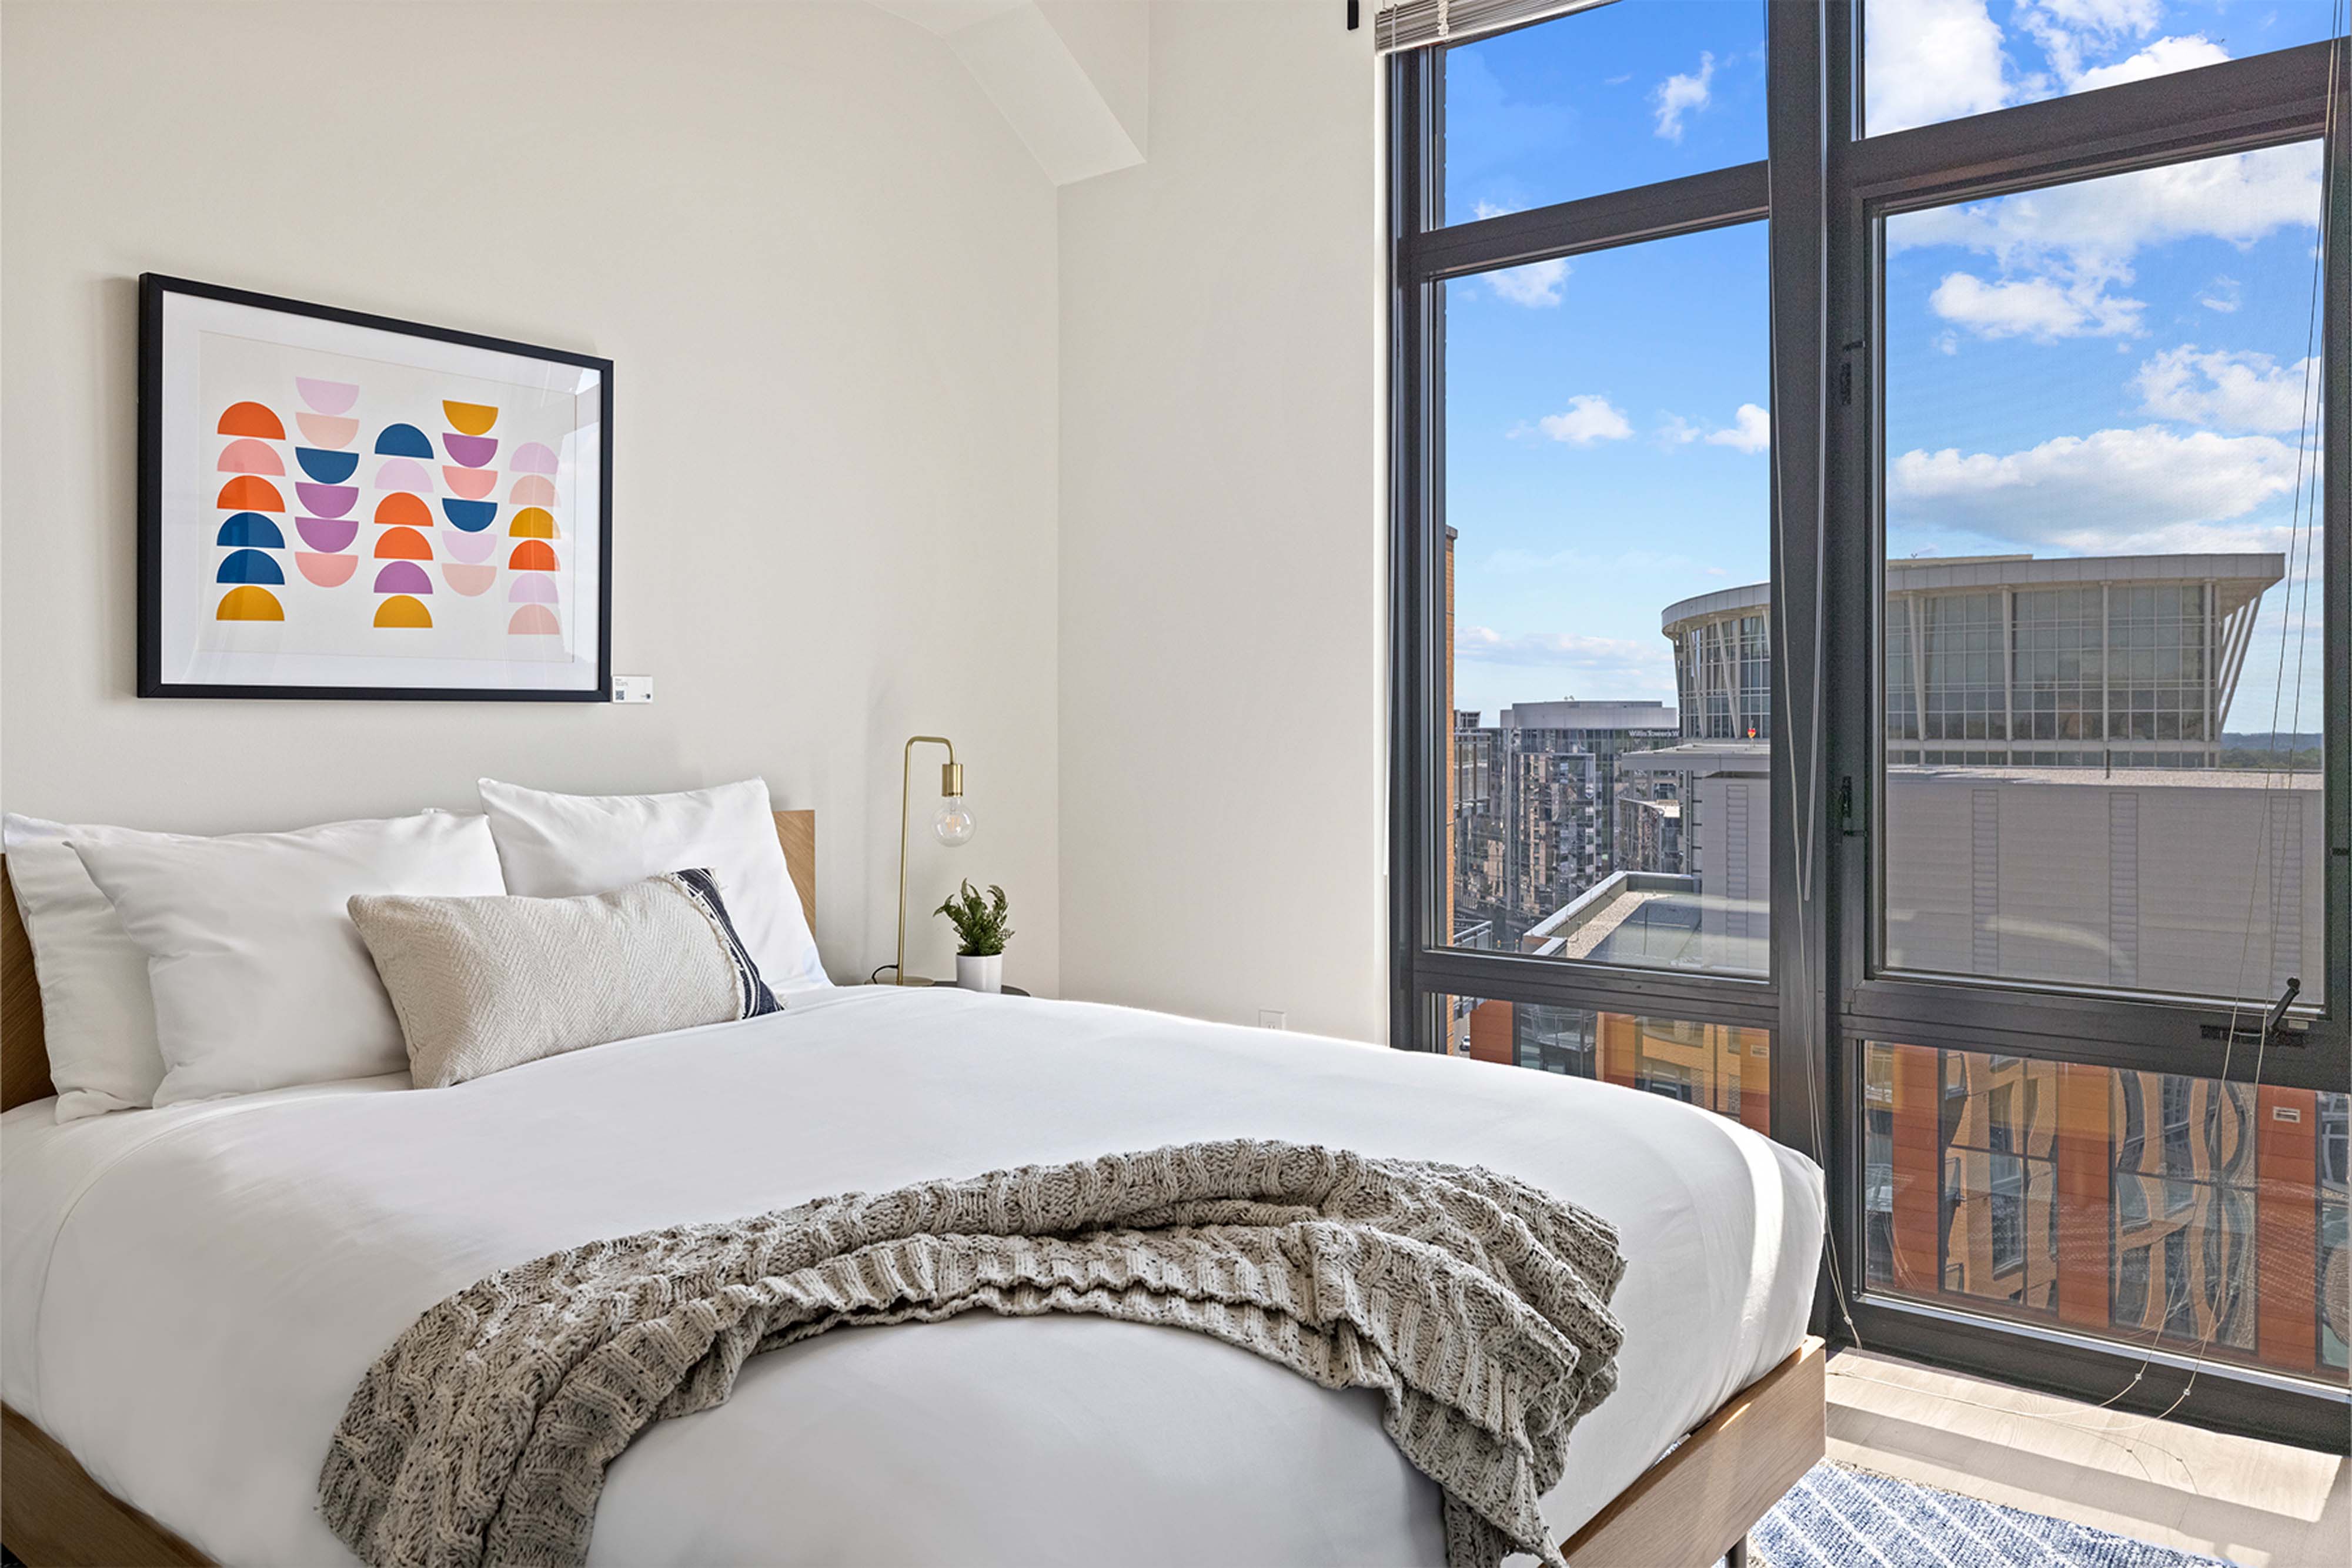 Bedroom with views of Ballston 